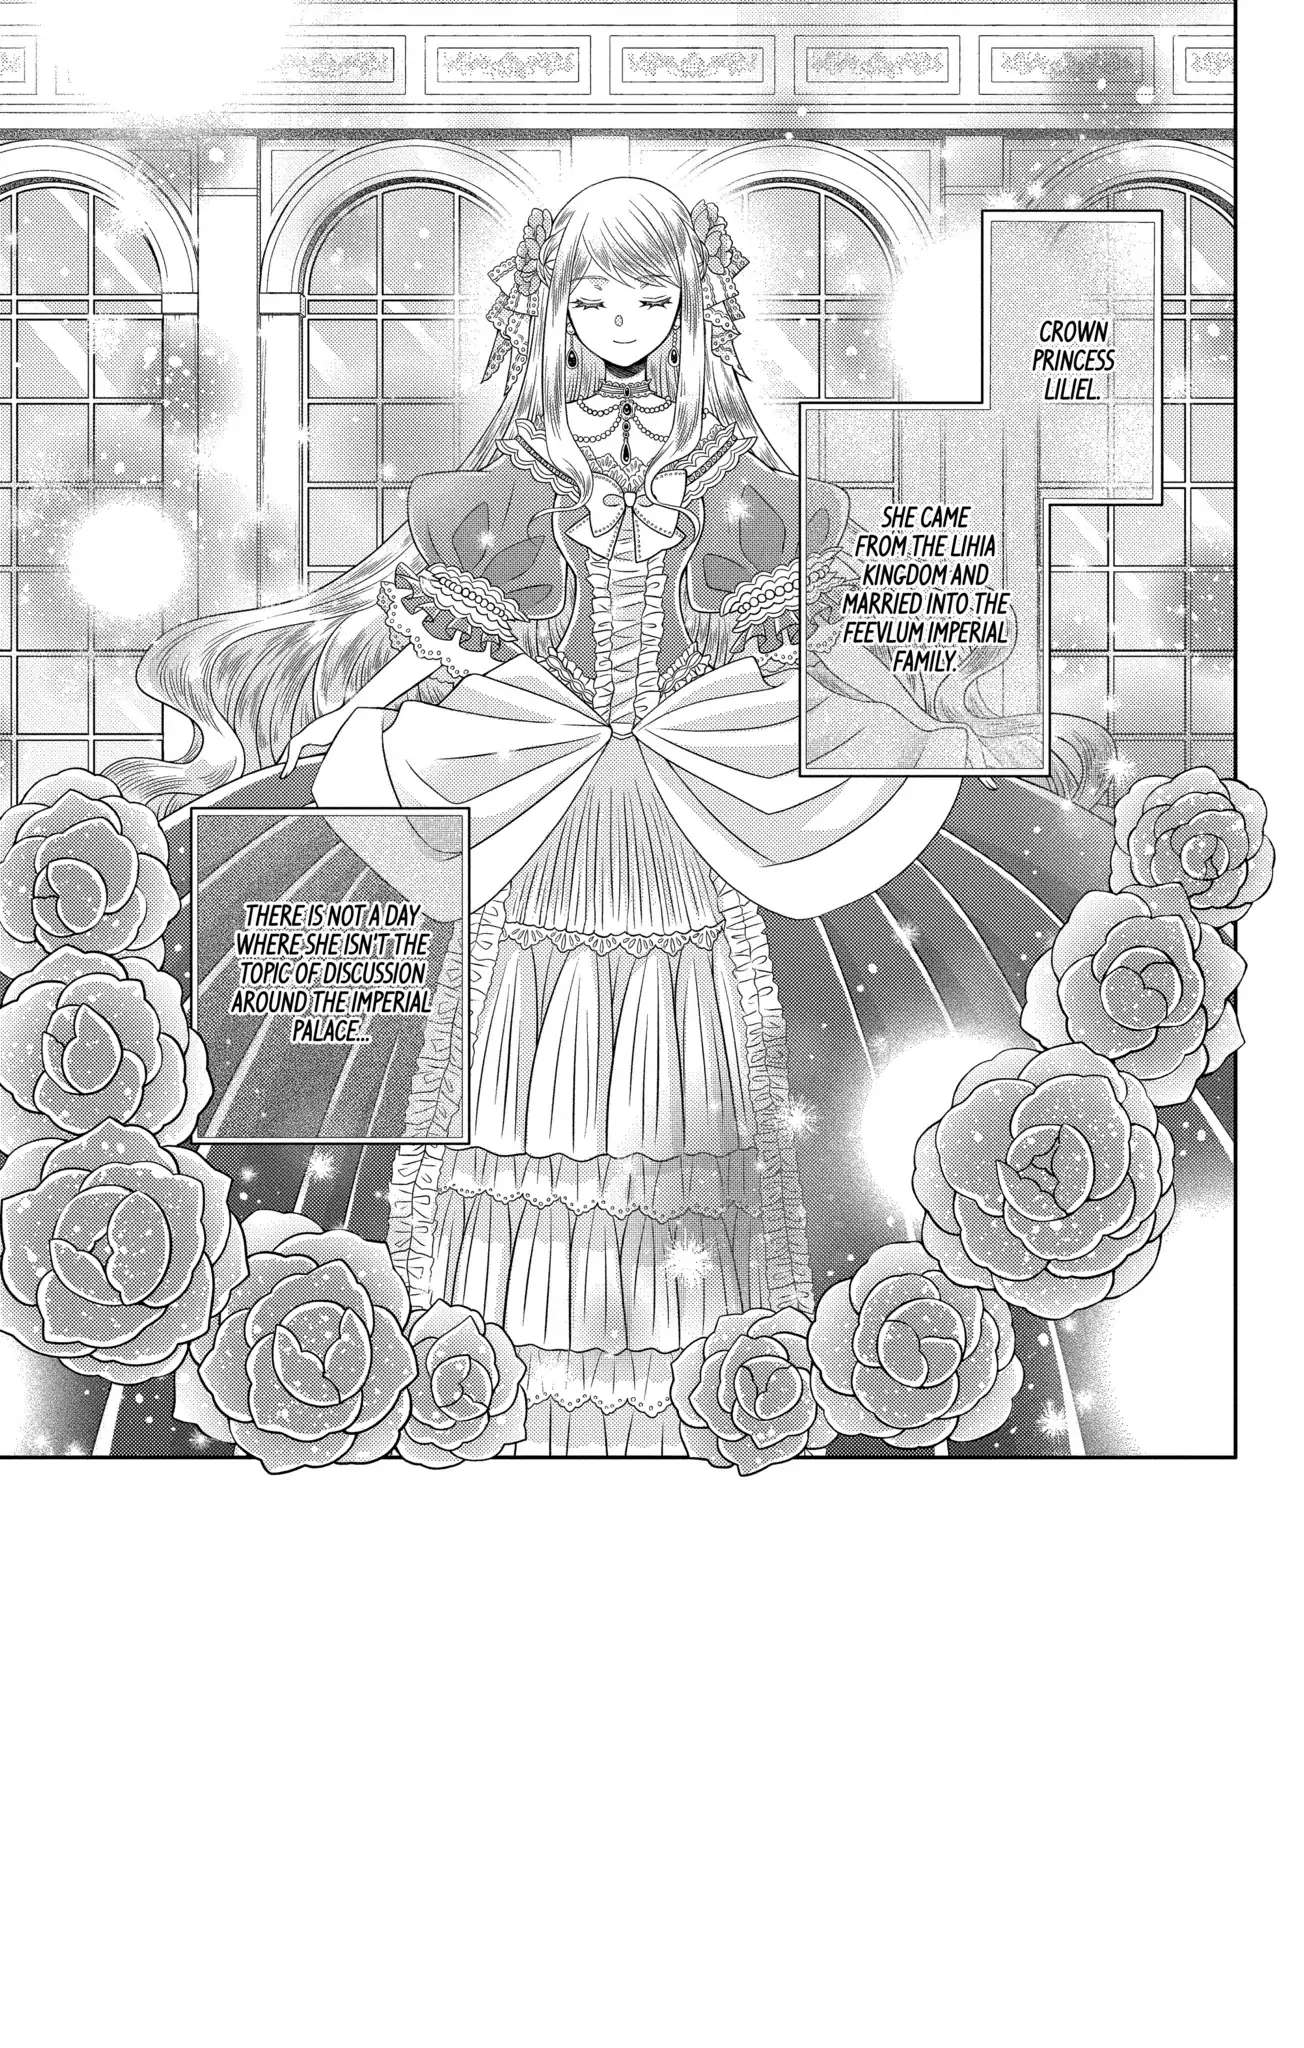 The Beloved Imperial Bride - Page 2